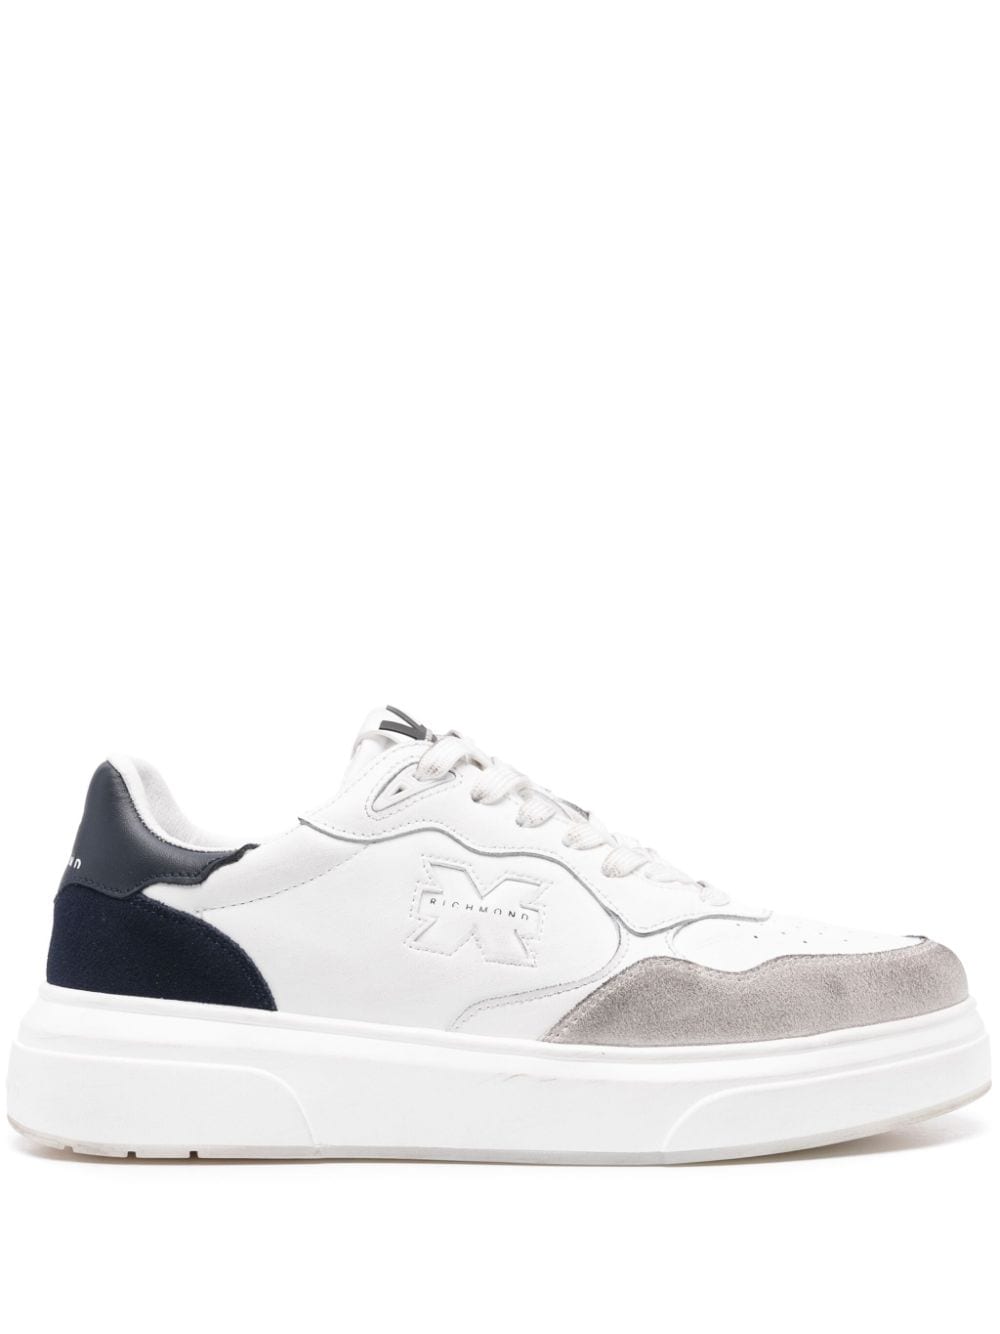 John Richmond Debossed Logo Leather Trainers In White